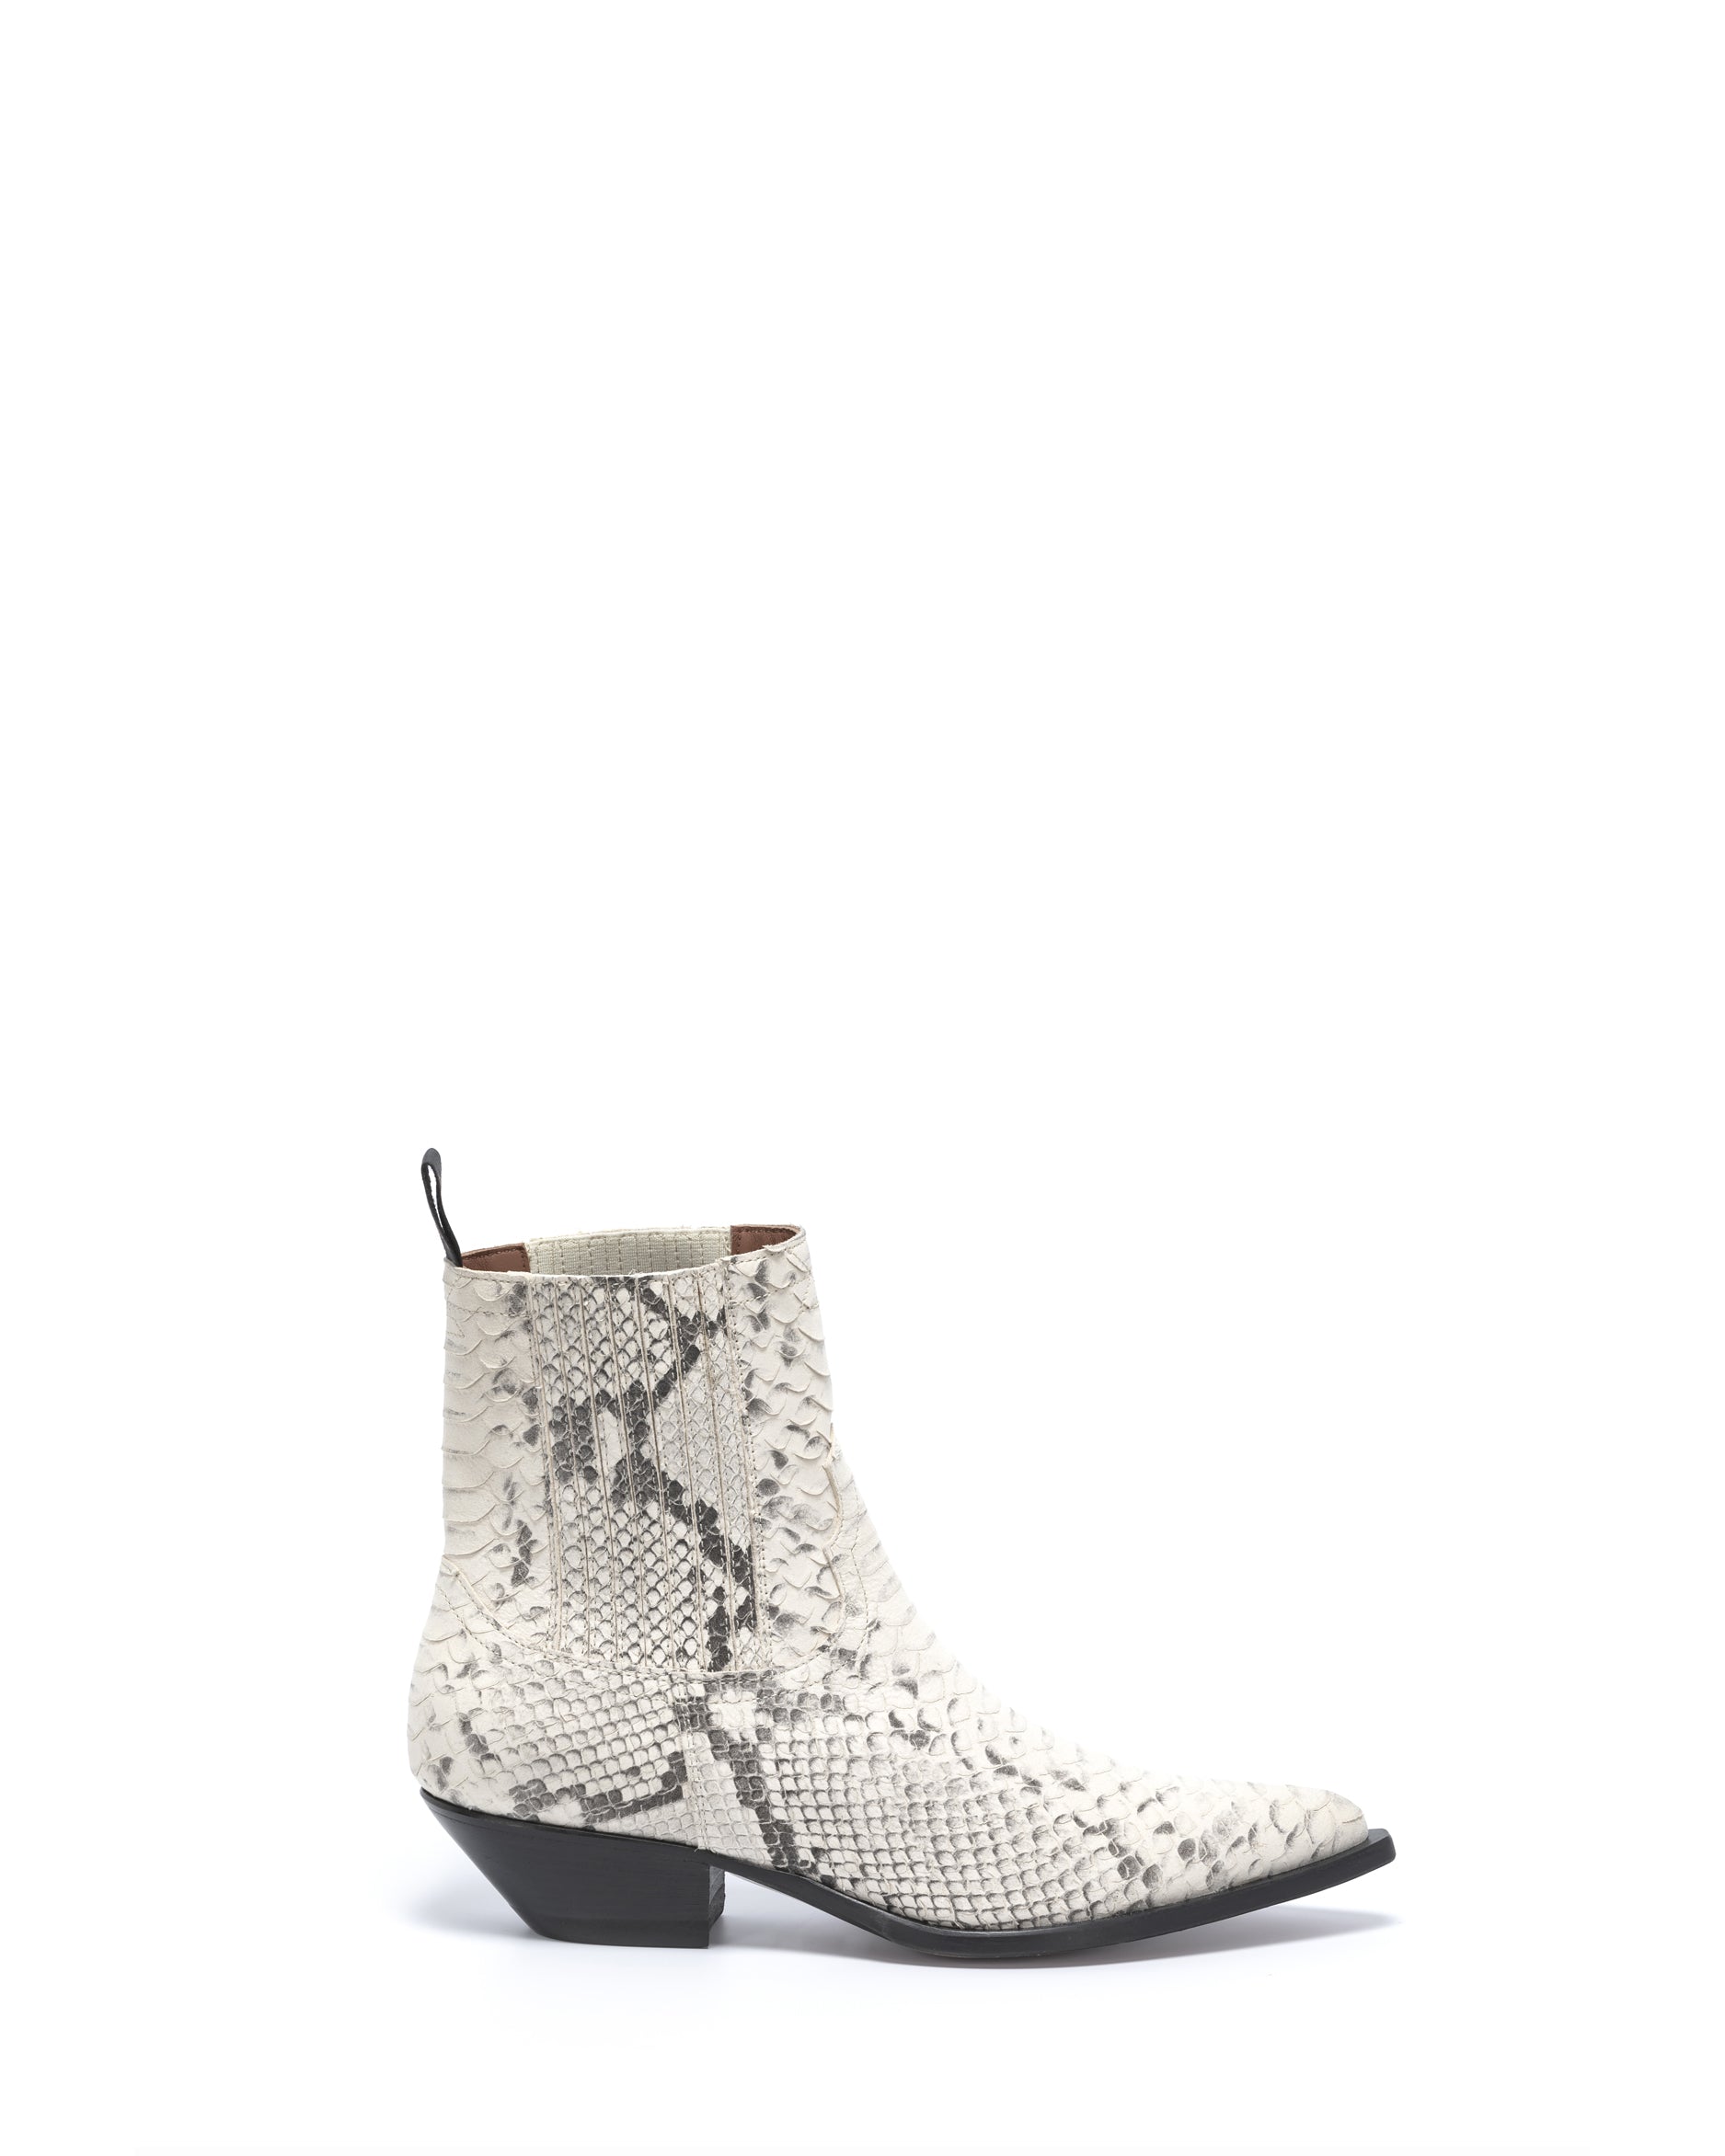 HIDALGO Men's Ankle Boots in Grey Python – Boots